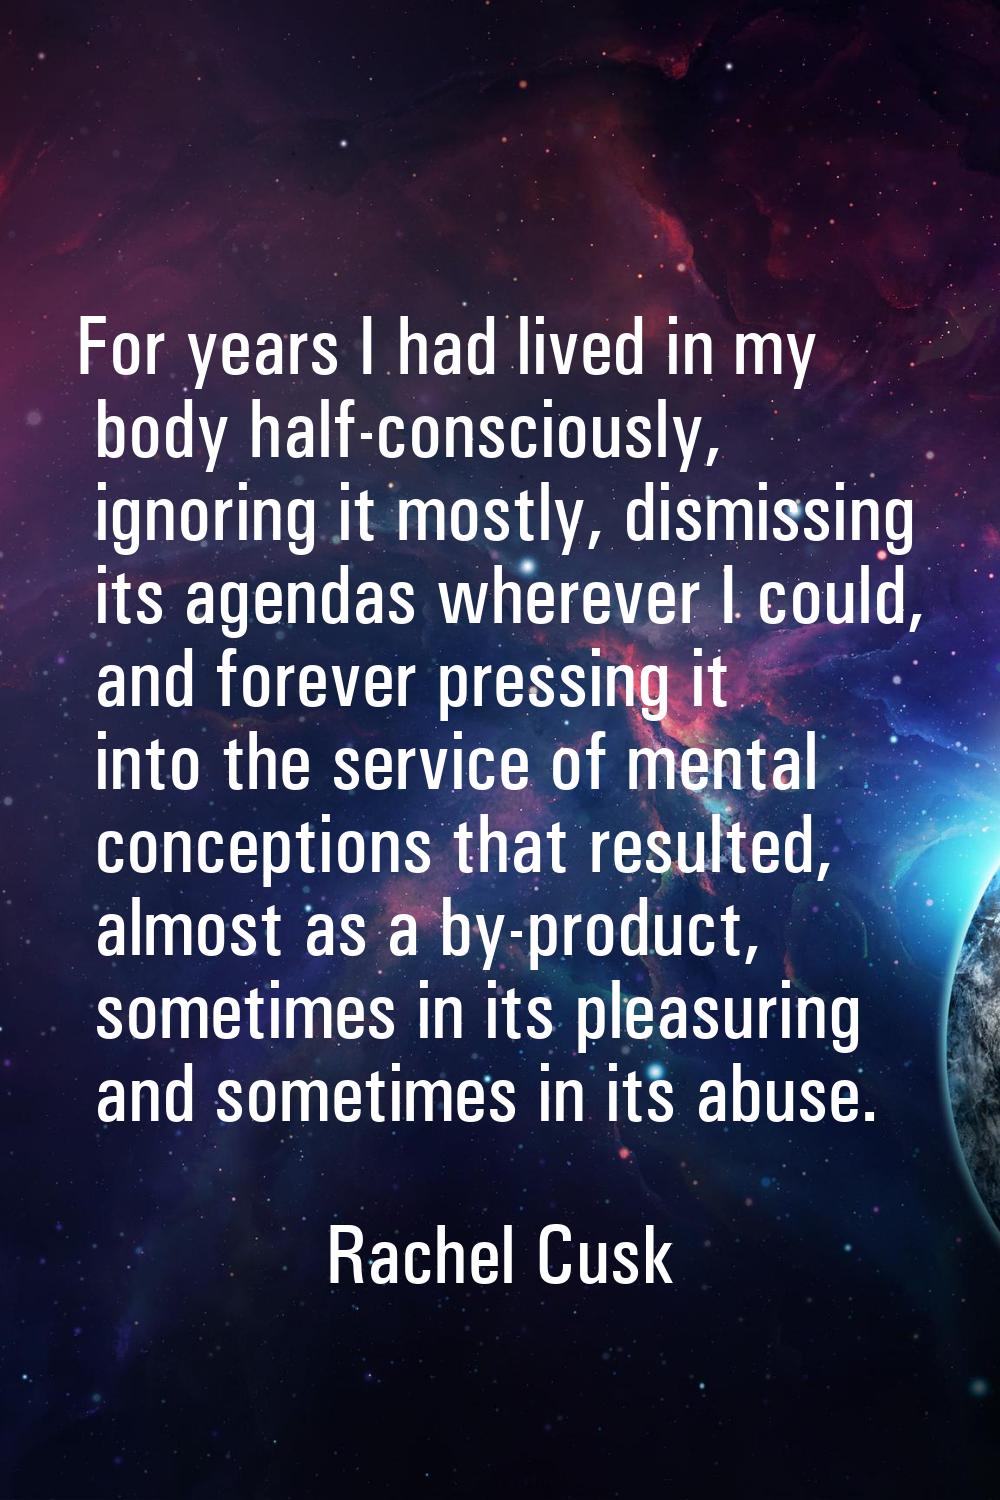 For years I had lived in my body half-consciously, ignoring it mostly, dismissing its agendas where